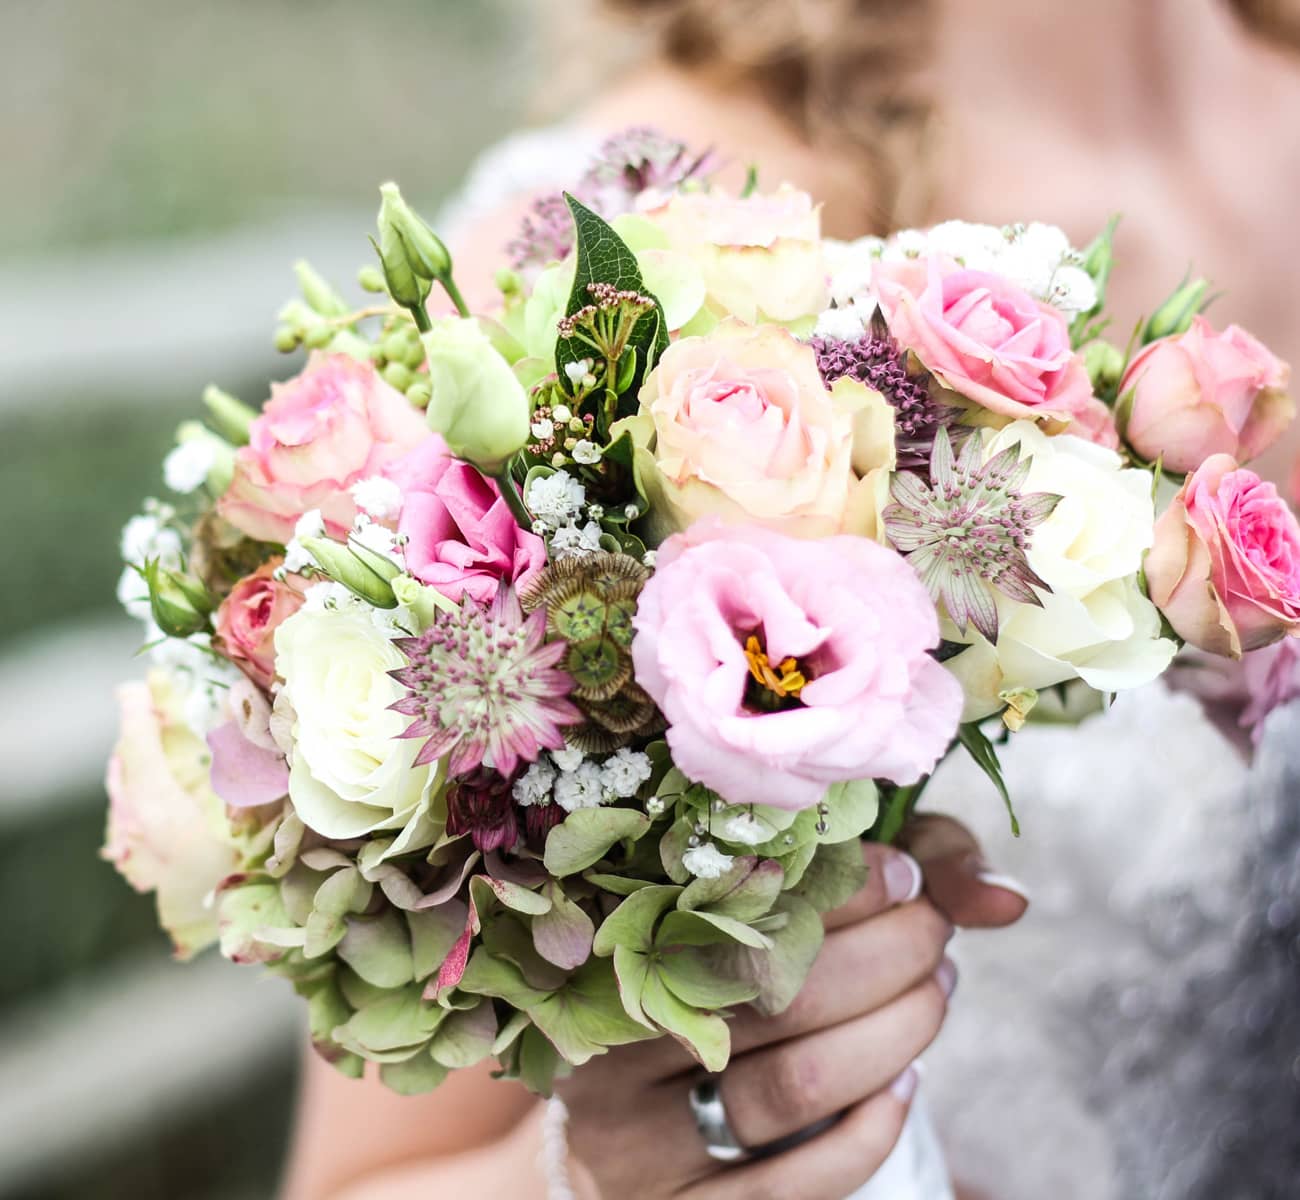 A lush pink bridal bouquet held by a bride represents what comes as a part of wedding flower packages.